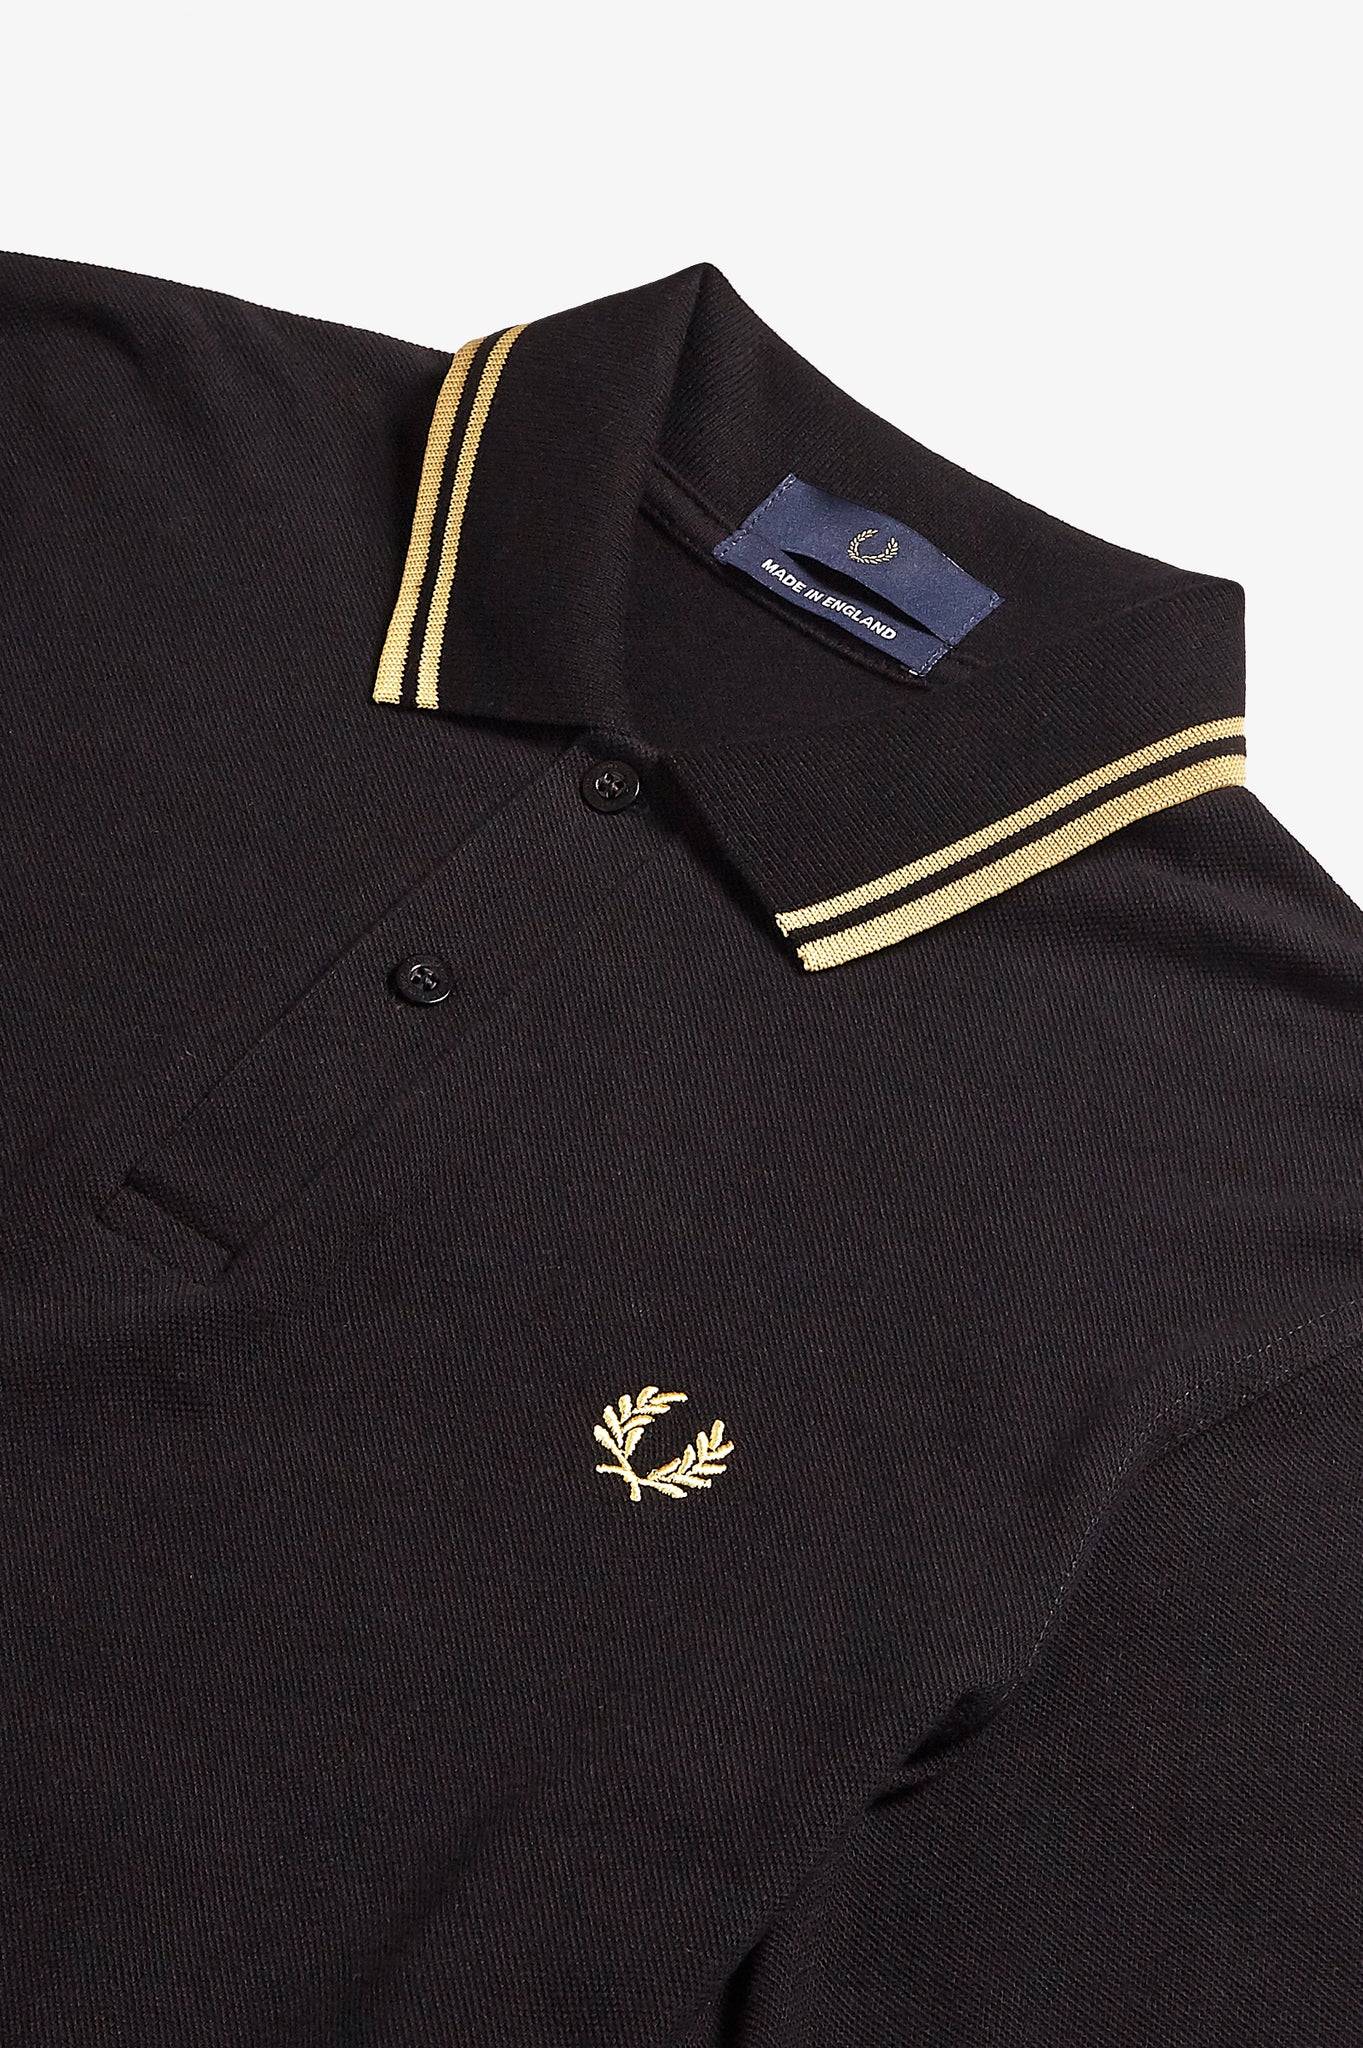 fred perry black and gold polo shirt